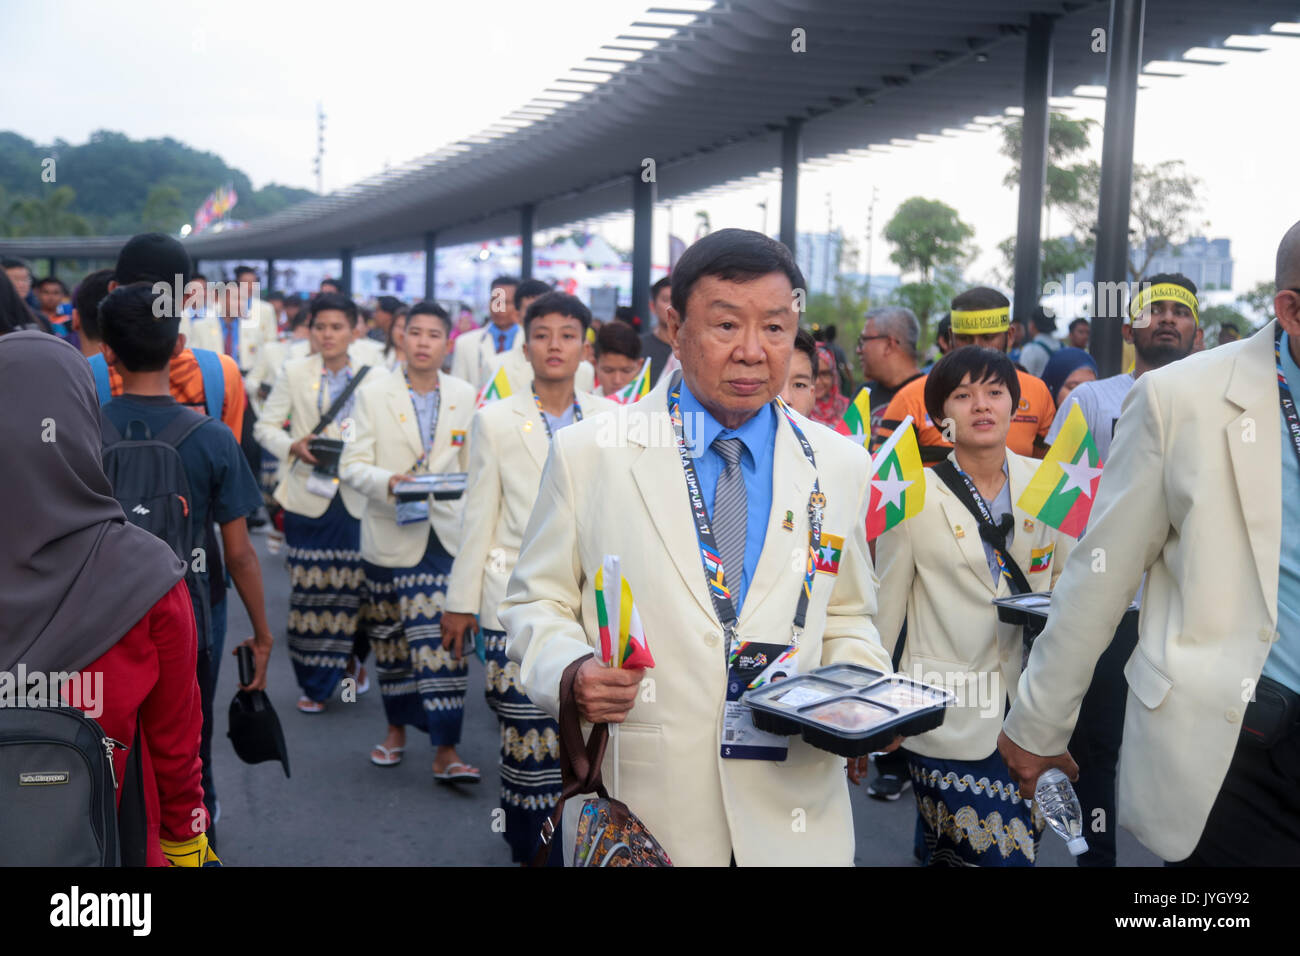 Myanmar officers group outside the national stadium during the opening ceremony of 29th SEA games. Credit: Calvin Chan/Alamy Live News Stock Photo